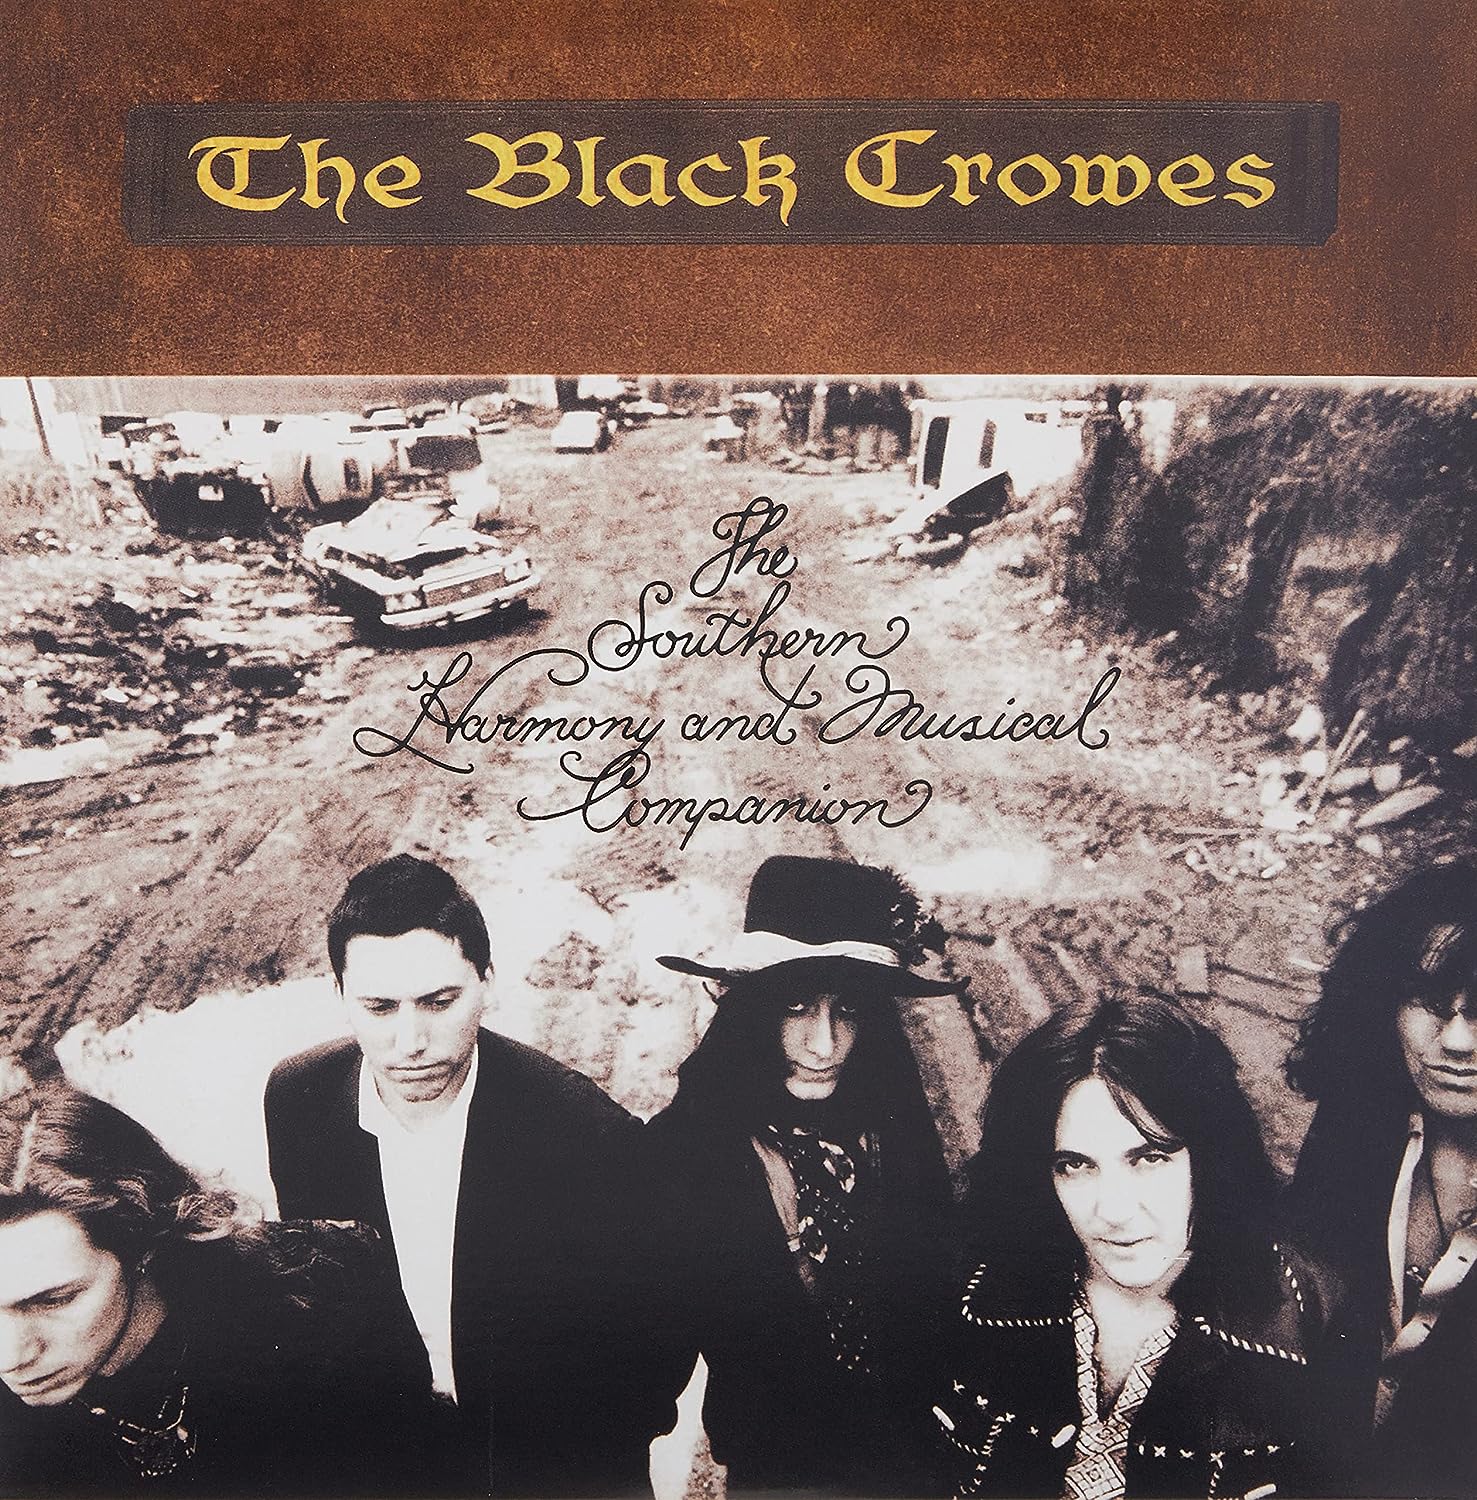 Black Crowes- The Southern Harmony And Musical Companion (UK 1st Press)